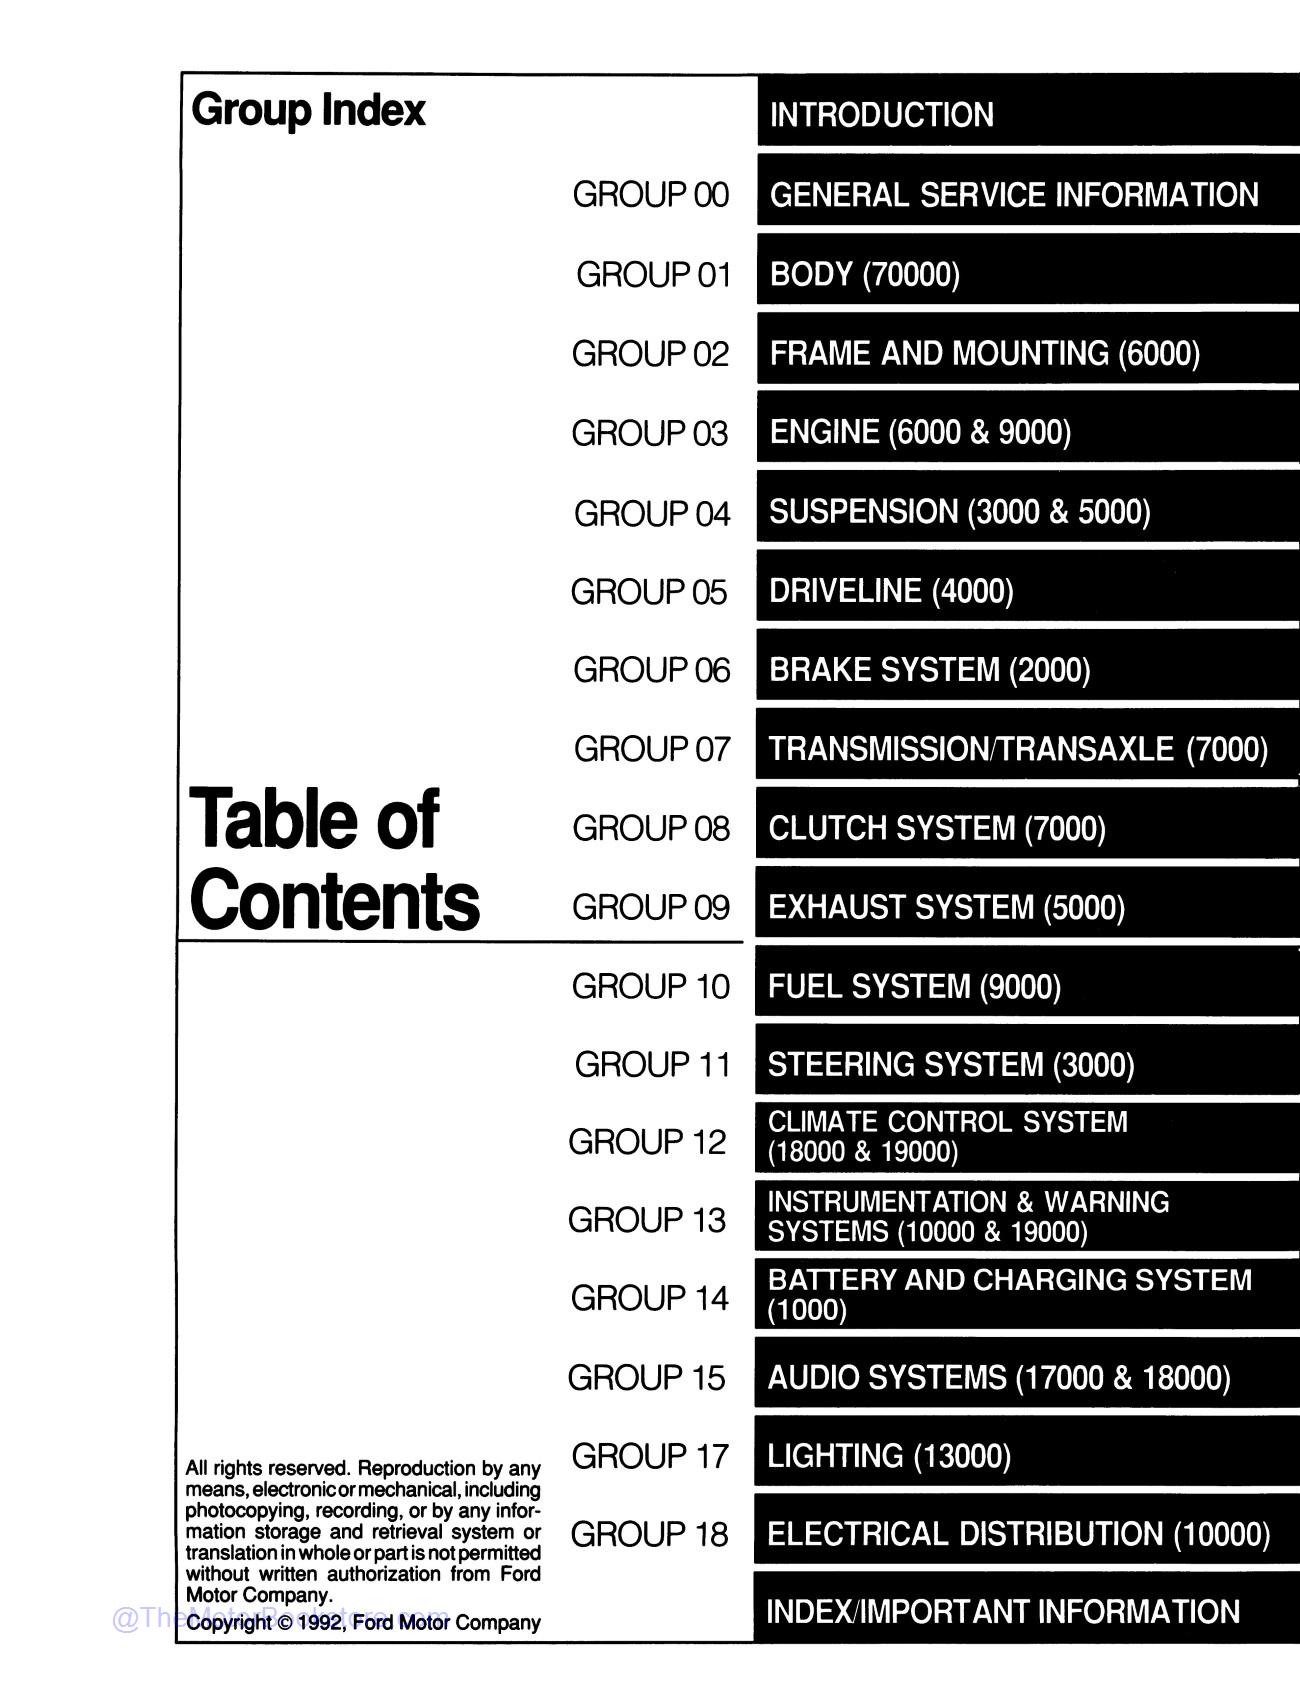 1993 Ford Mustang Service Manual  - Table of Contents